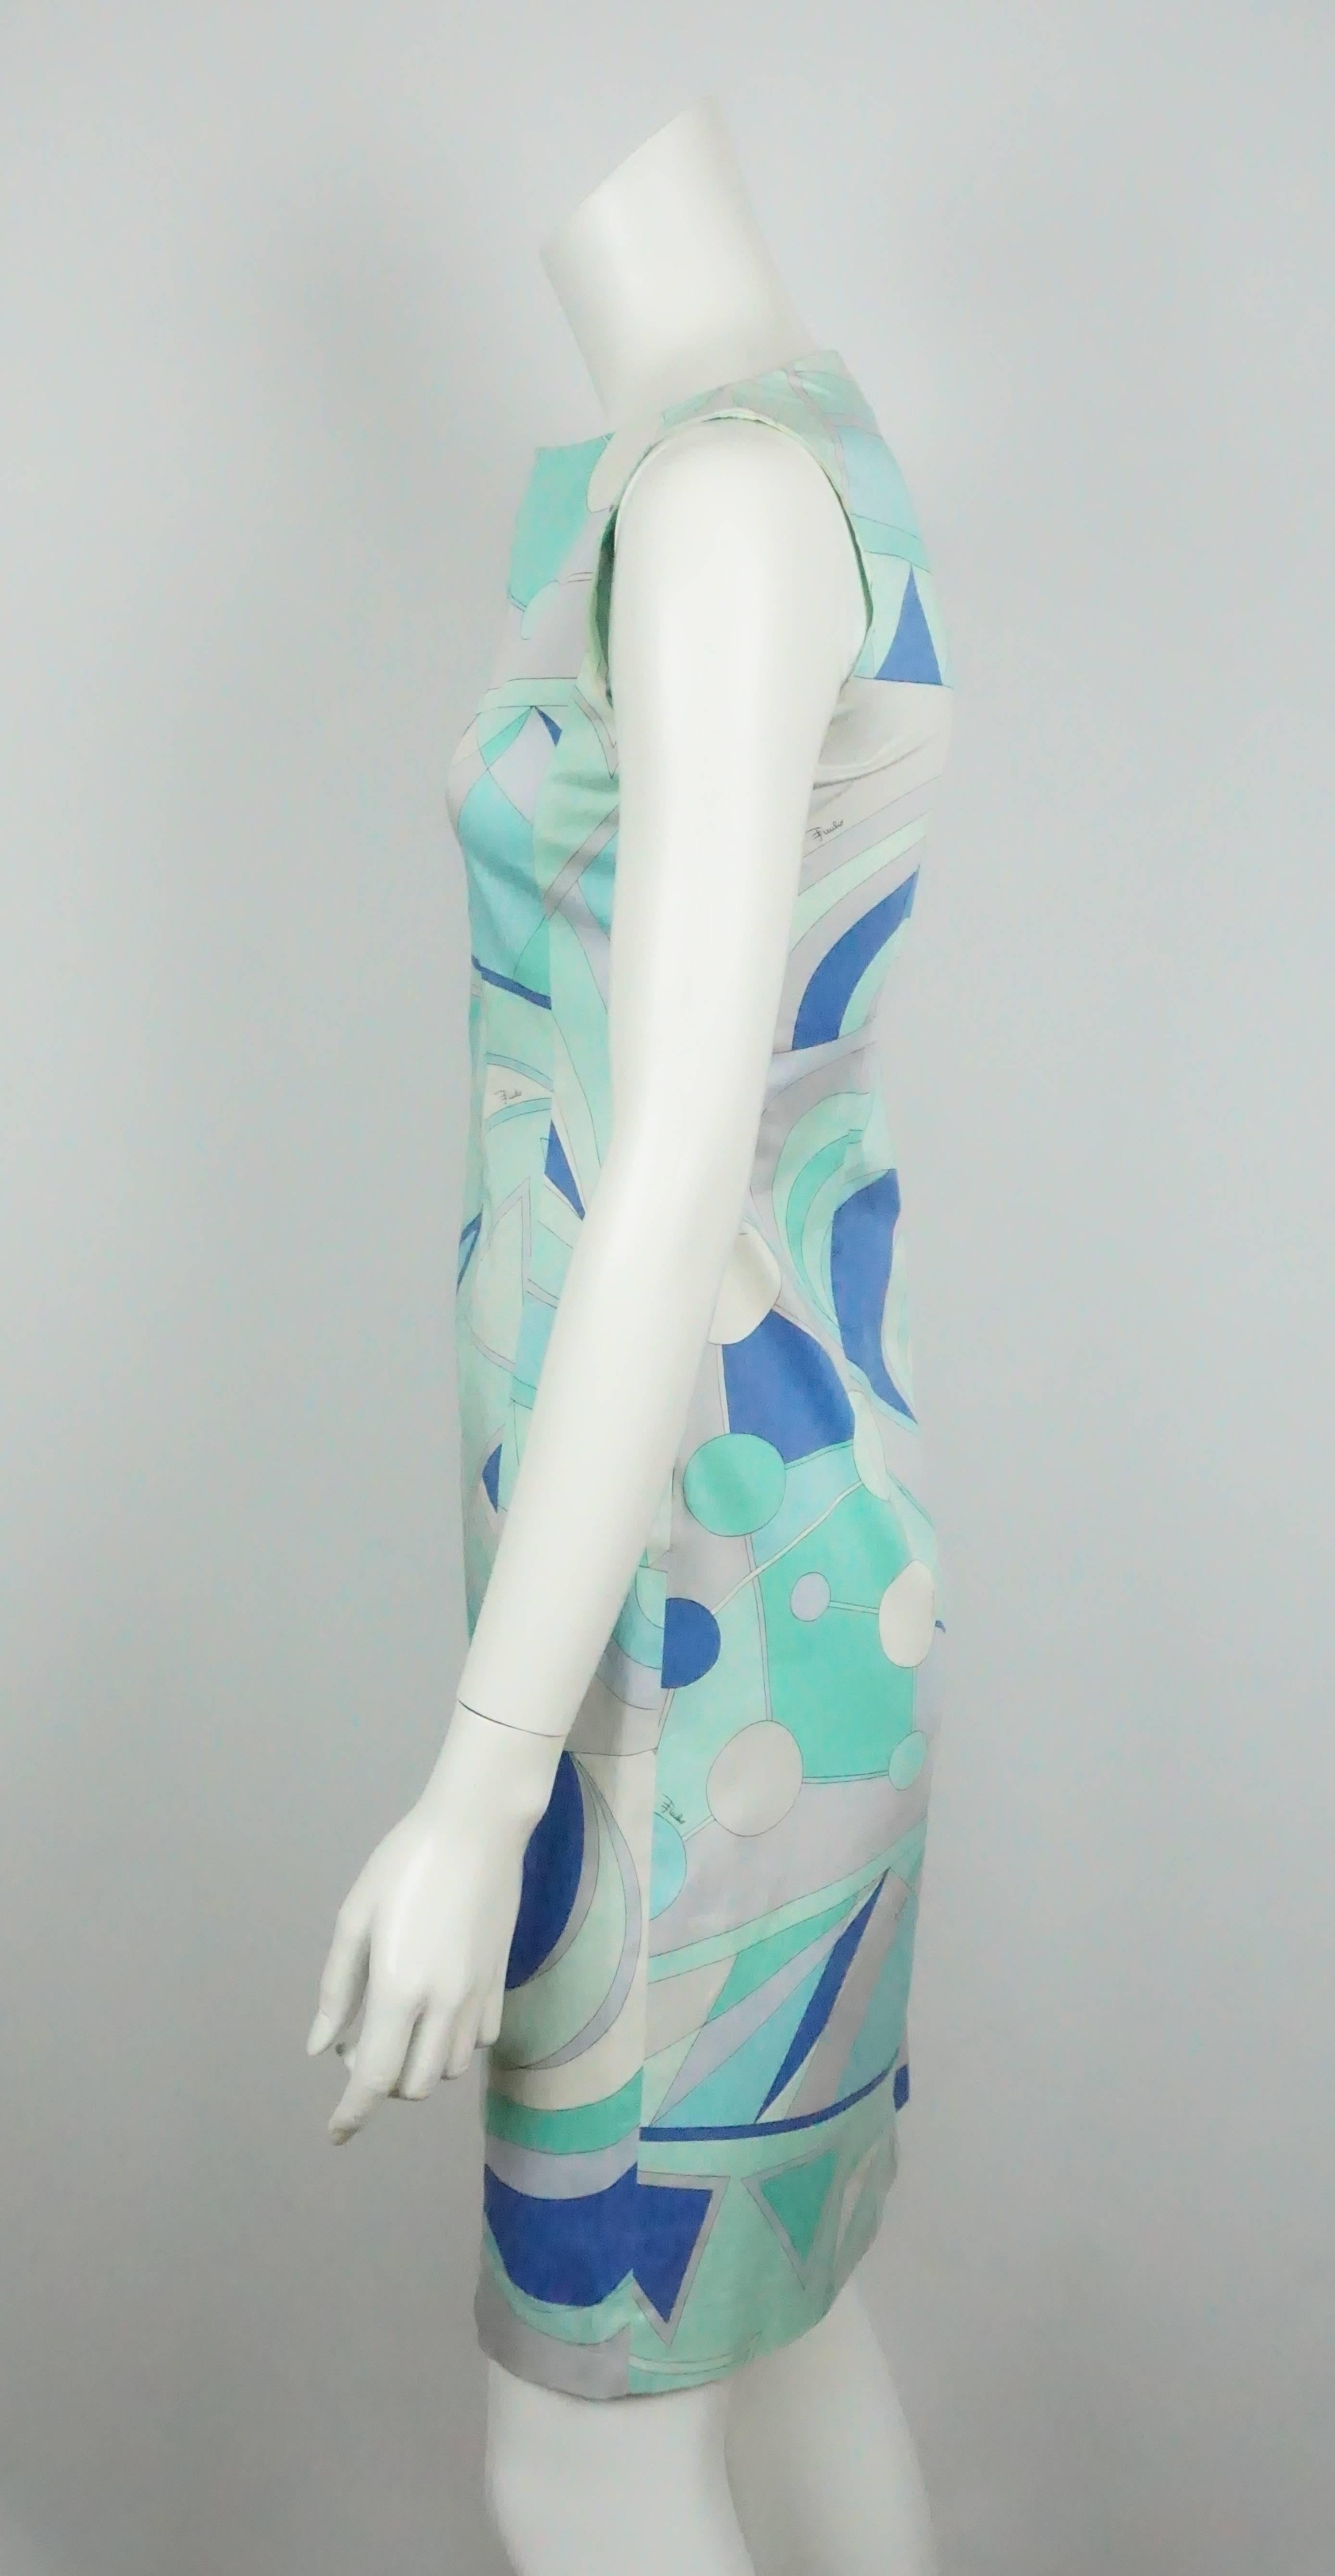 Emilio Pucci Blue & Aqua Cotton Print Dress - 38 F - 6 US  This pretty cotton and spandex blend pucci dress has a beautiful blue and aqua print and a side zip. The dress is in very good condition.
Measurements:
Bust 32